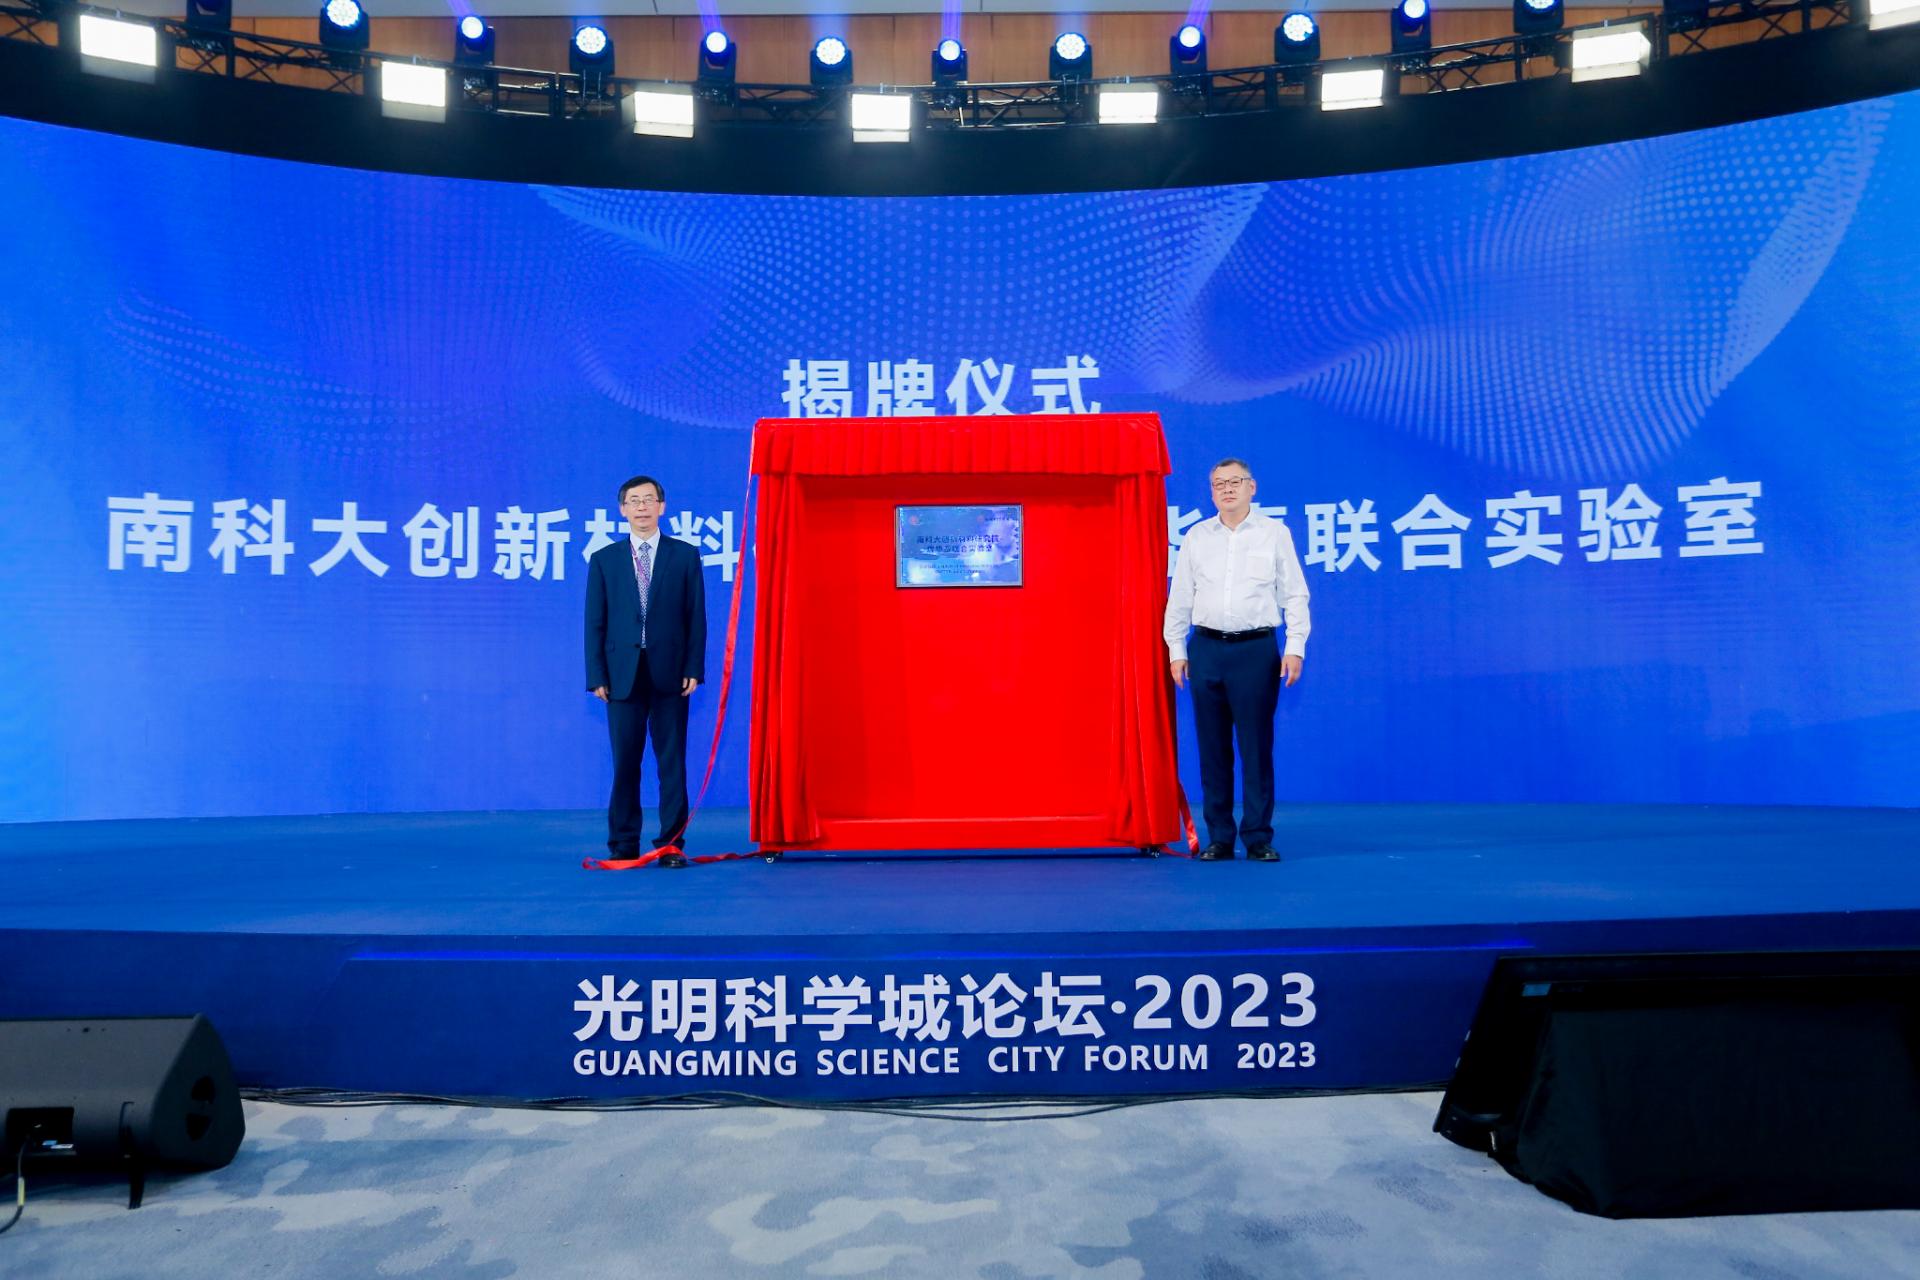 SUSTech successfully held parallel forum of Guangming Science City Forum 2023 on new materials science